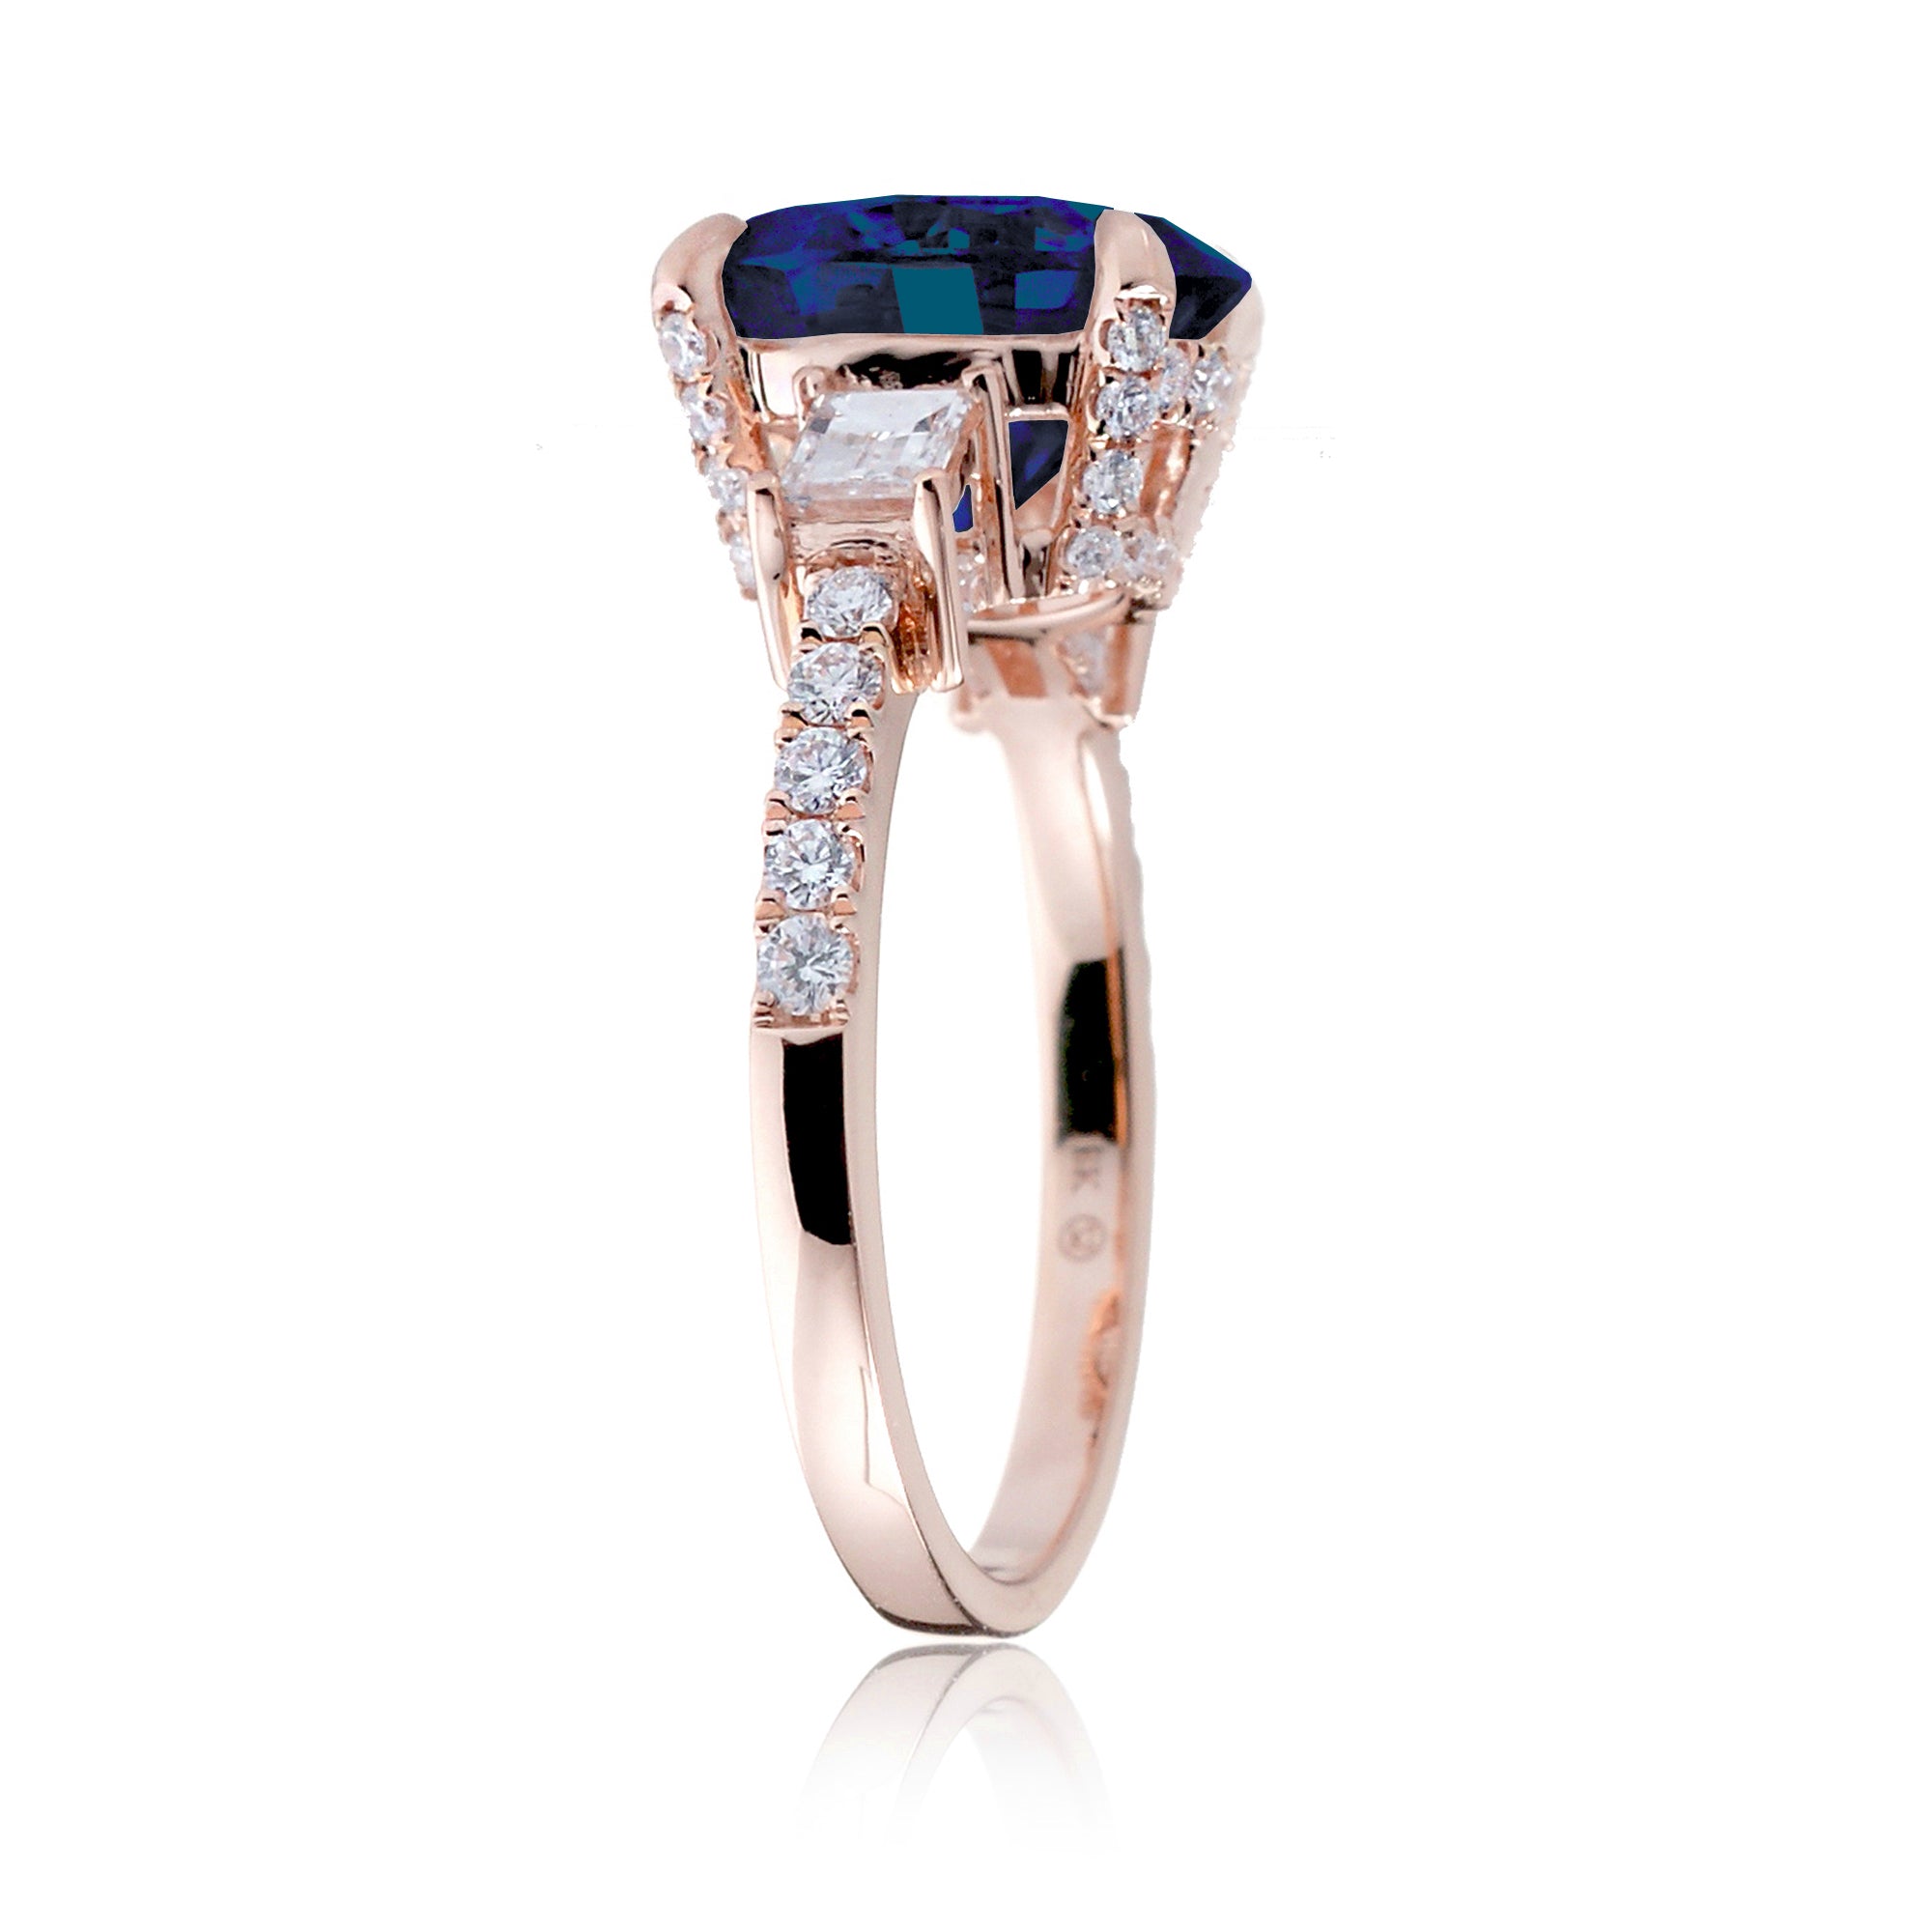 Sapphire ring three stone baguette rose gold